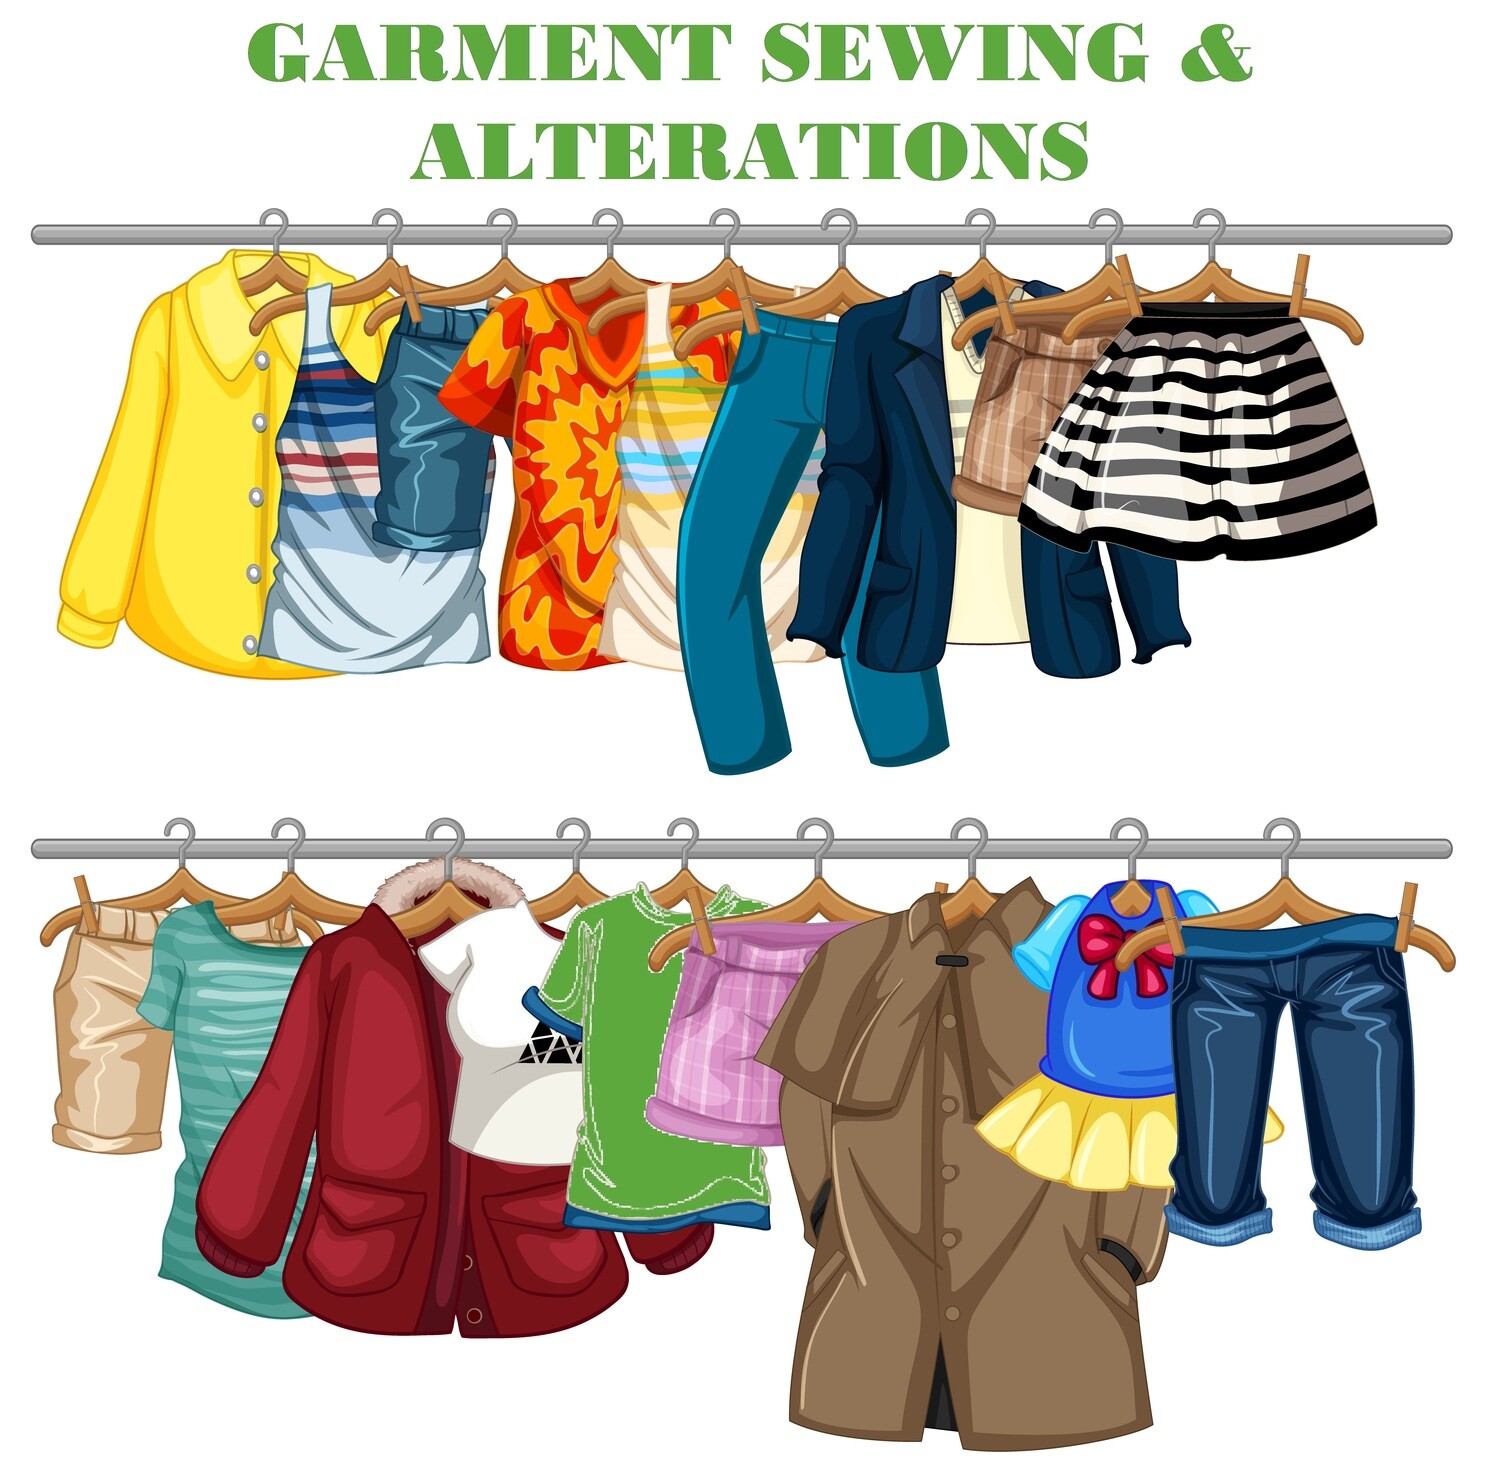 GARMENT SEWING & ALTERATIONS
$50.00 + HST (each)
Saturday December 16th, 10:30 am - 4:30 pm